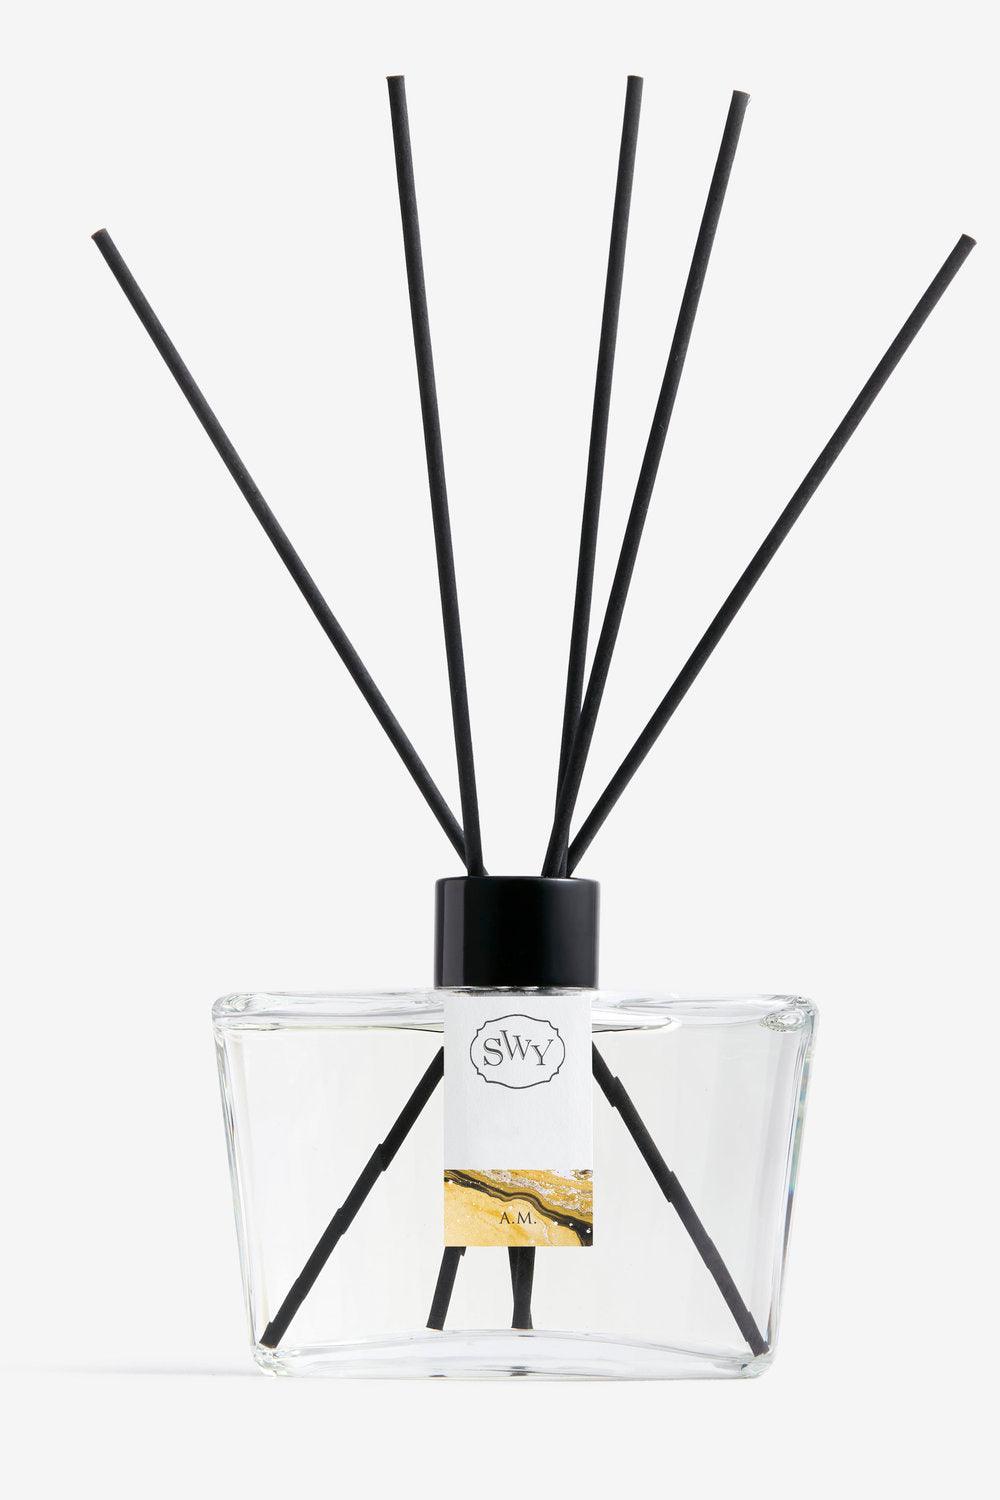 Reeds Diffuser – A.M. - SWY - Scent With You